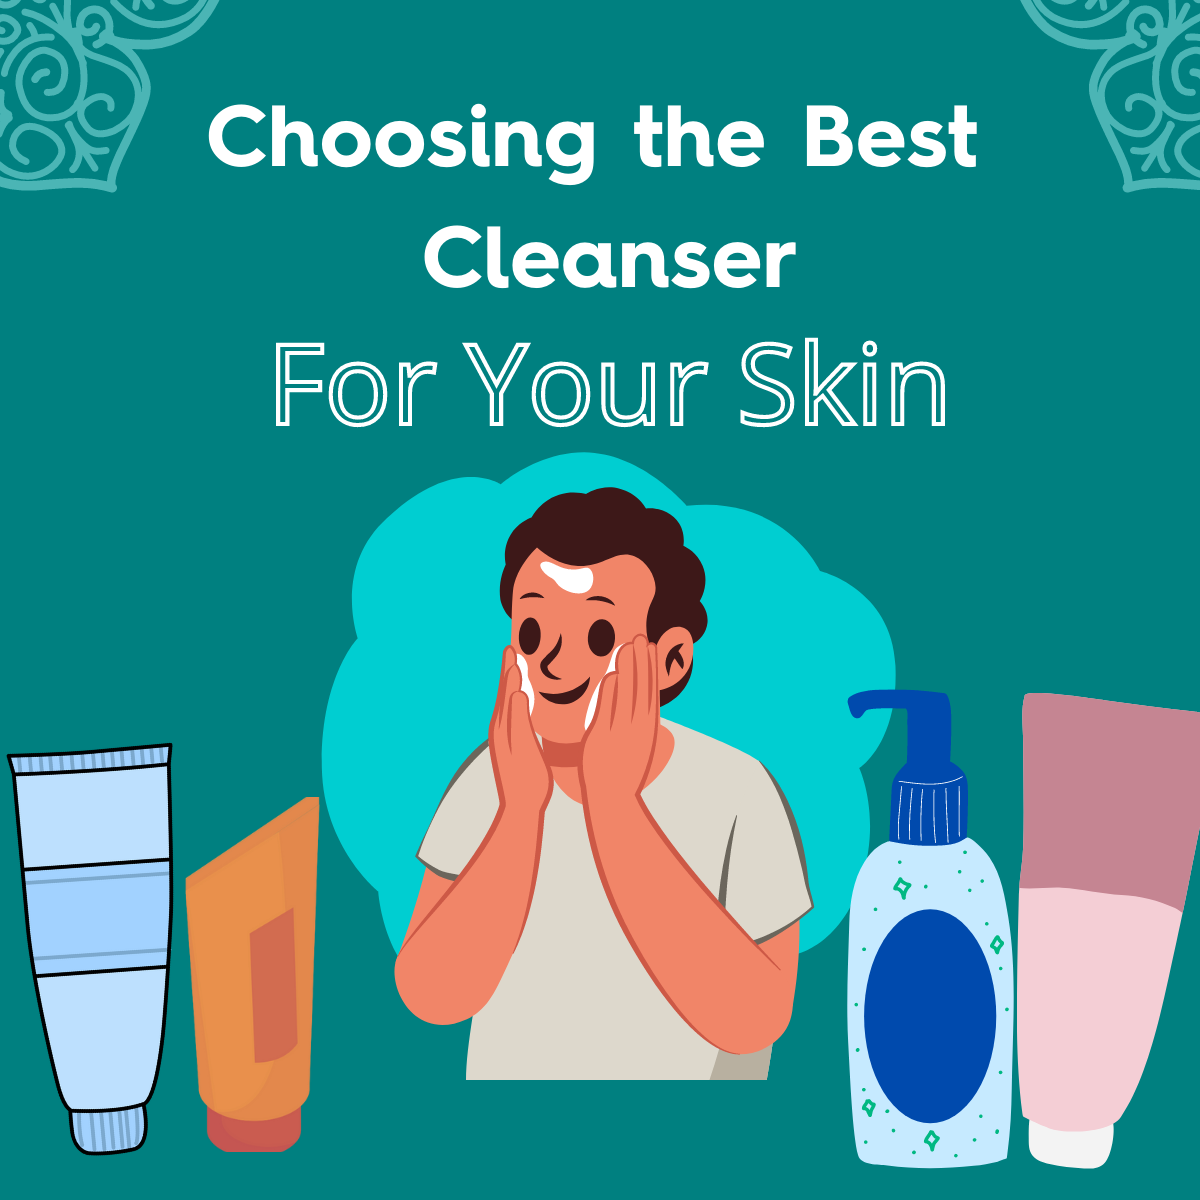 Tips for Choosing the Best Cleanser for Your Skin